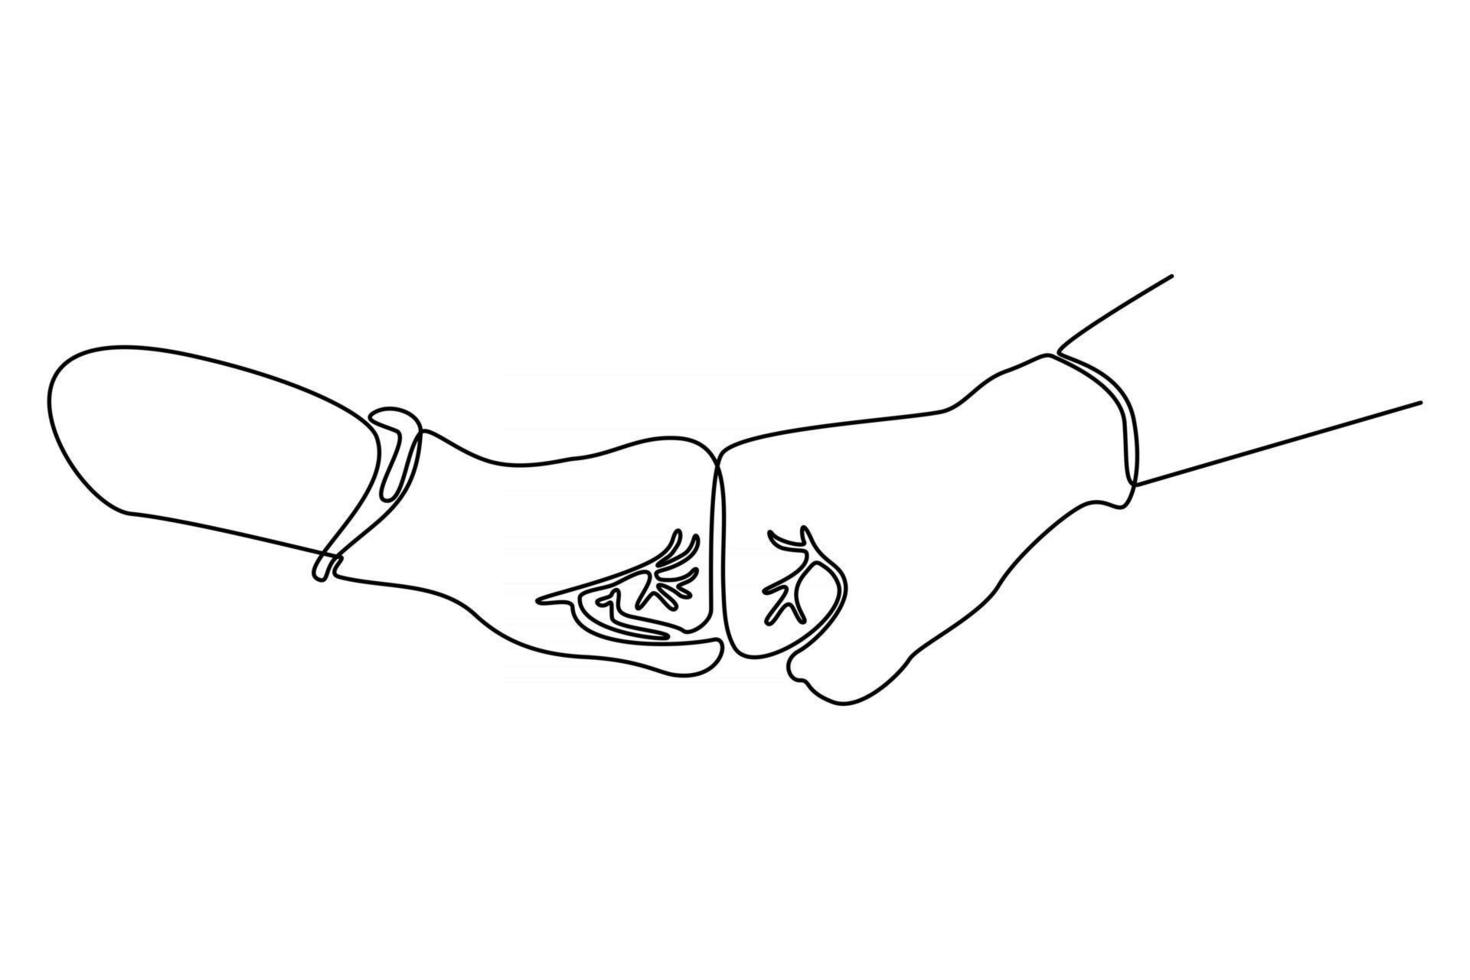 Continuous line of two hands with corona virus protective gloves vector illustration